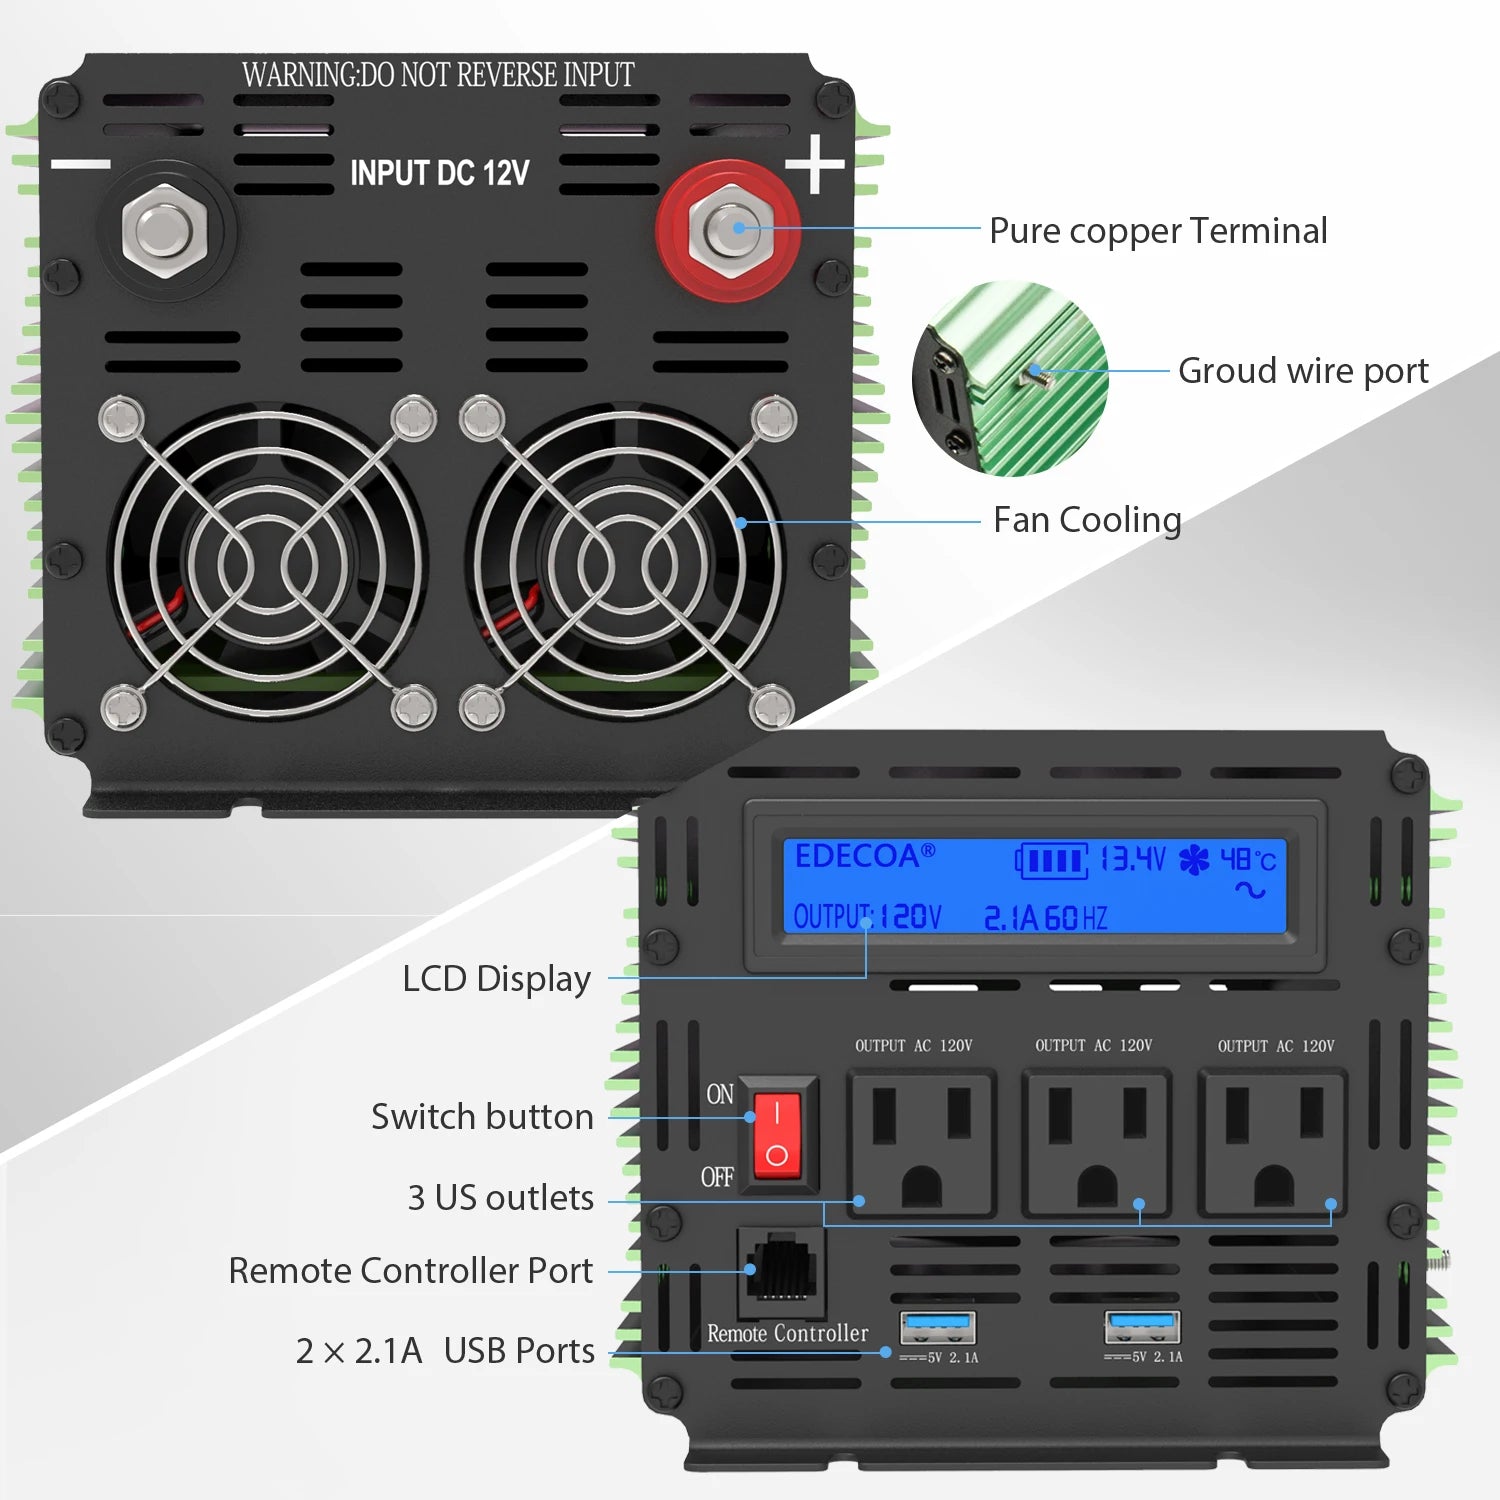 DC-AC power converter for off-grid solar systems, converting 12V DC to AC 110/120V, suitable for USA sockets.